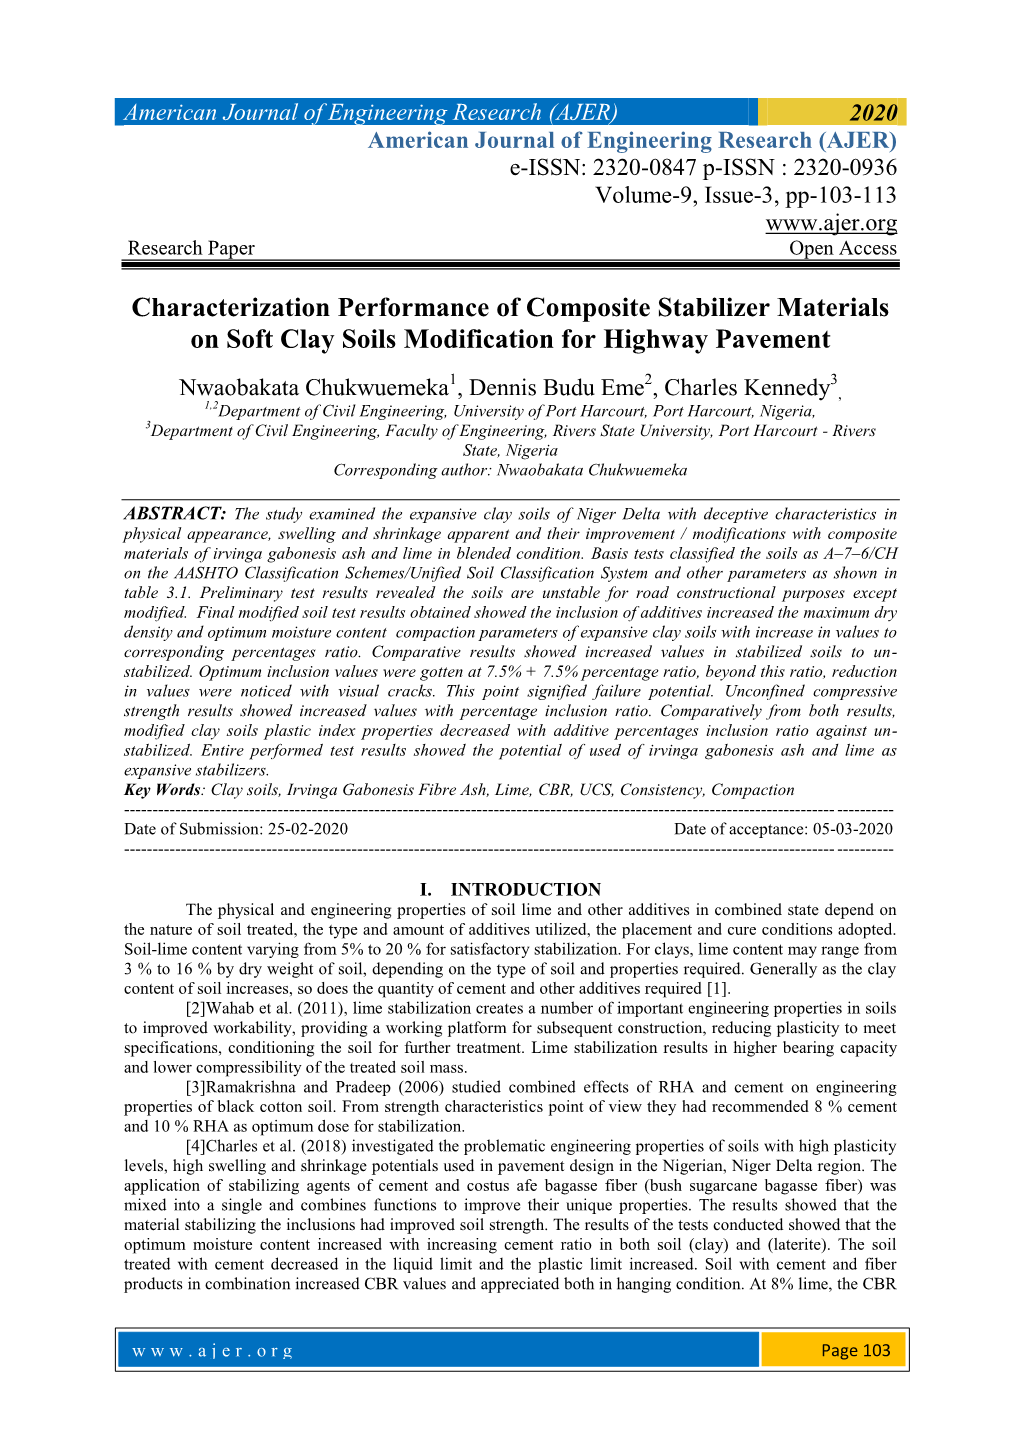 Characterization Performance of Composite Stabilizer Materials on Soft Clay Soils Modification for Highway Pavement